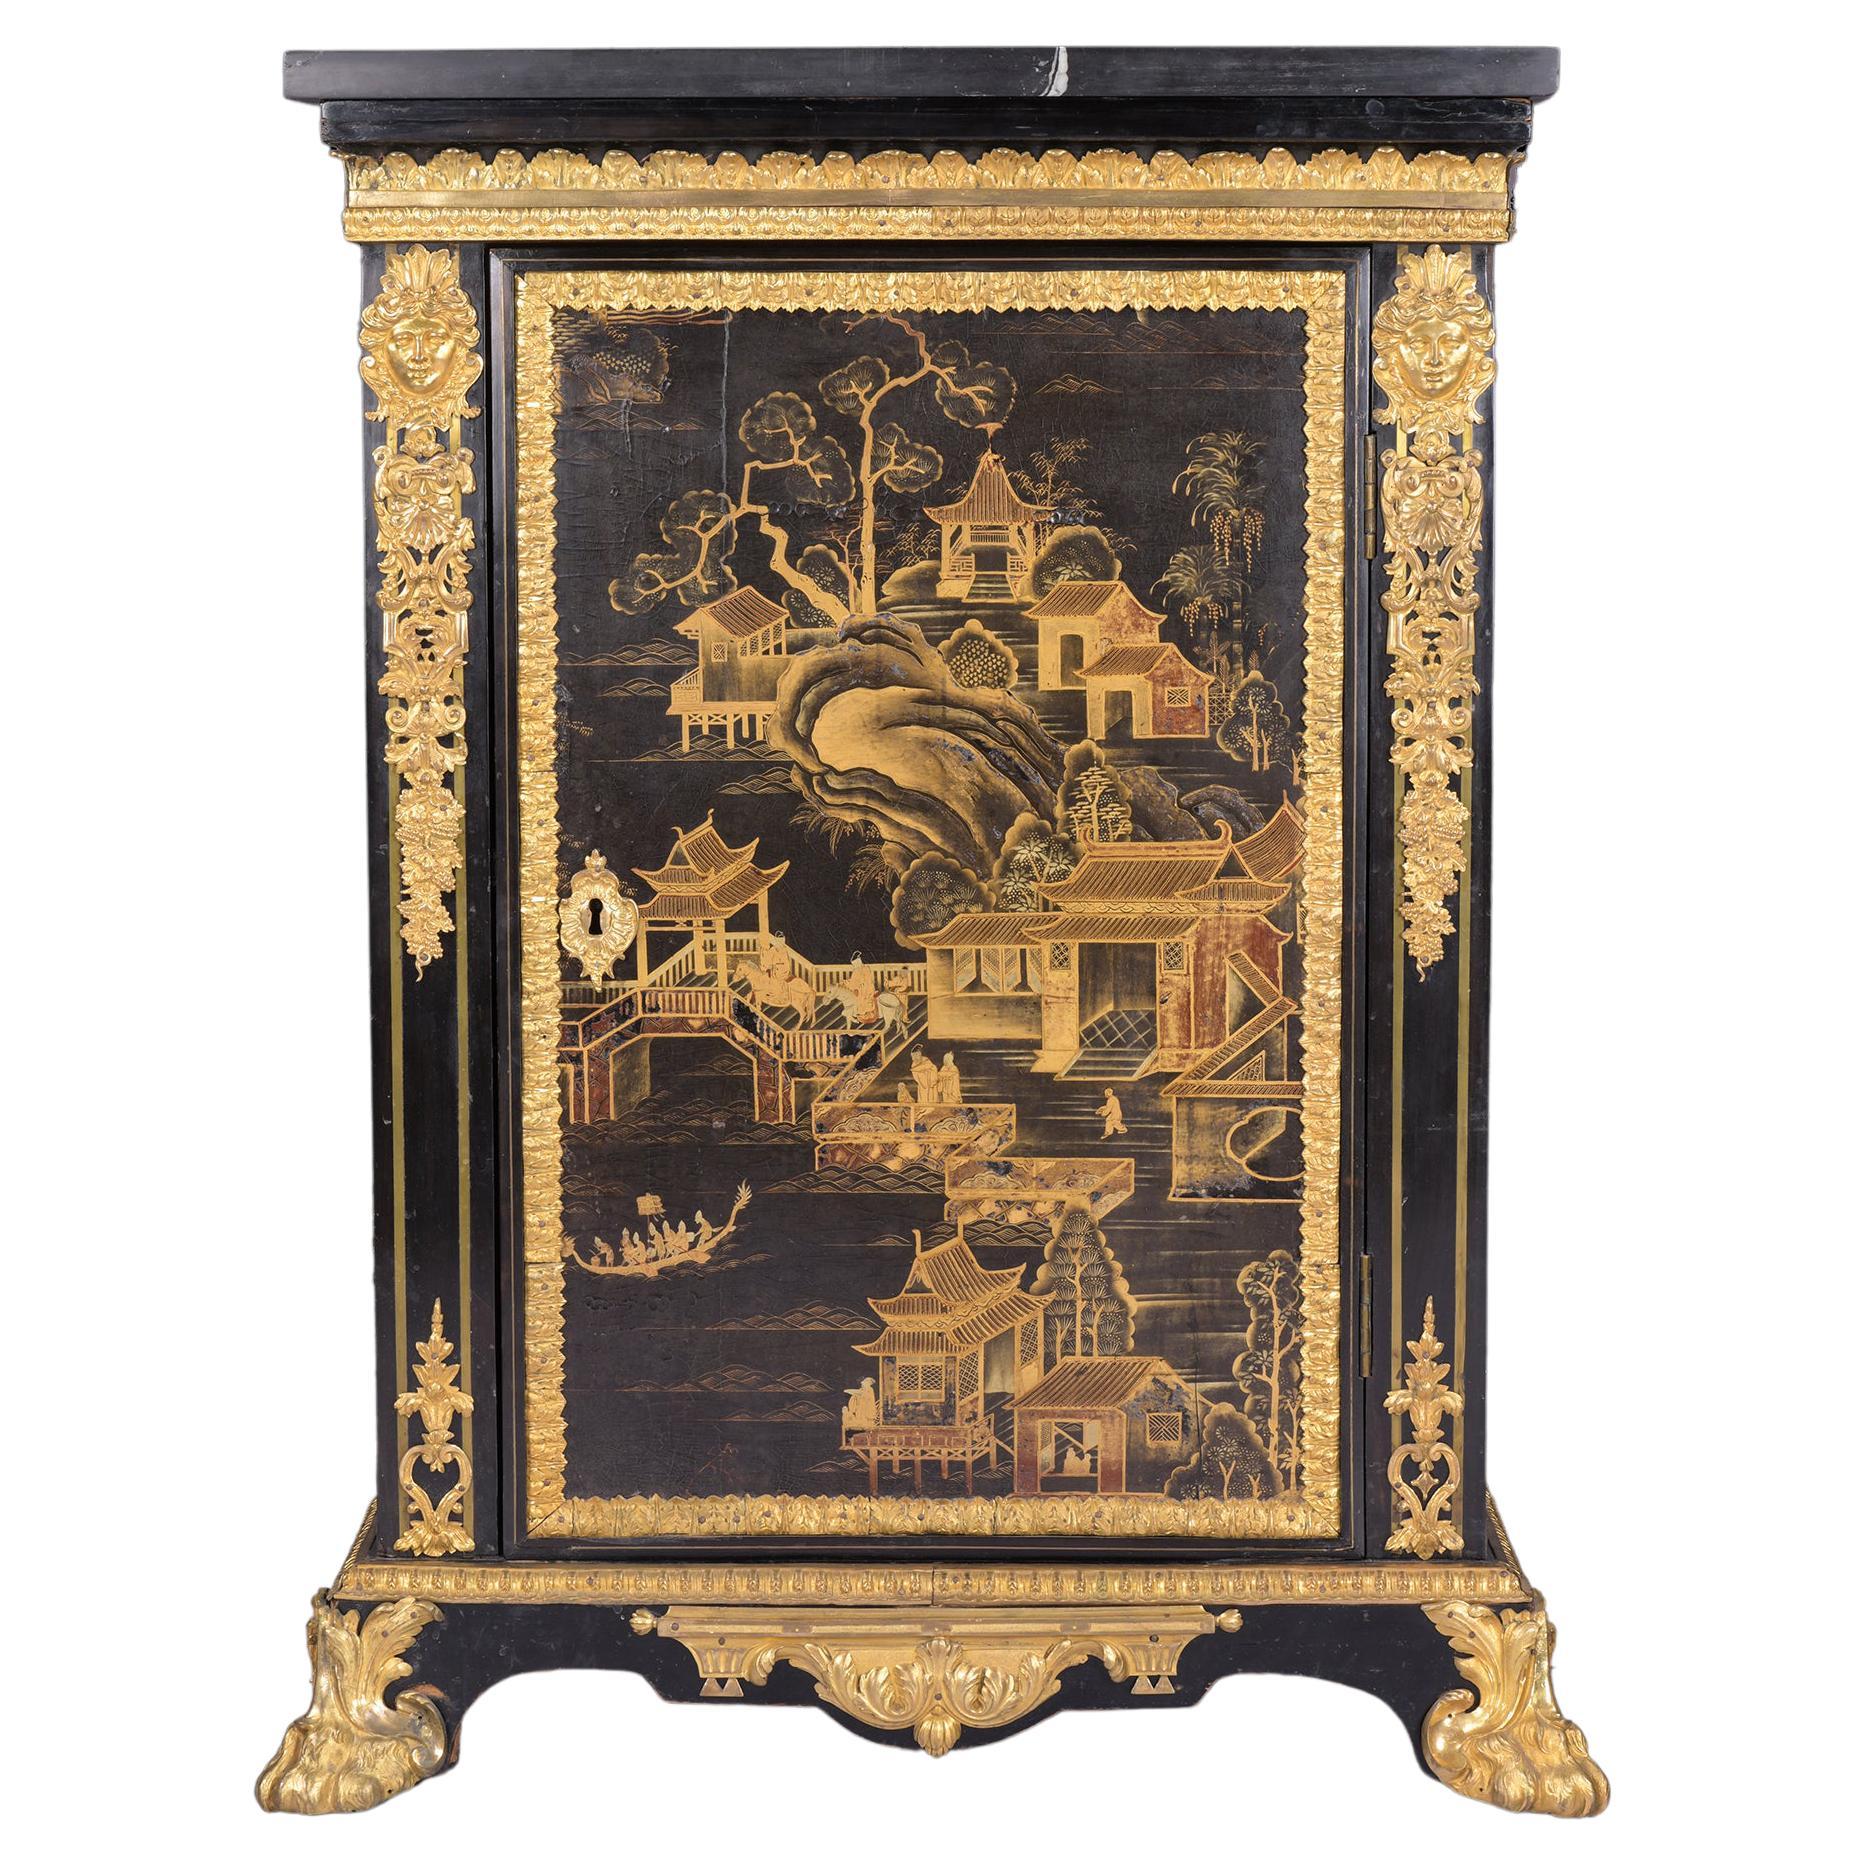 19th Century French Louis XVI Style Chinoserie & Ormolu Mounted Side Cabinet